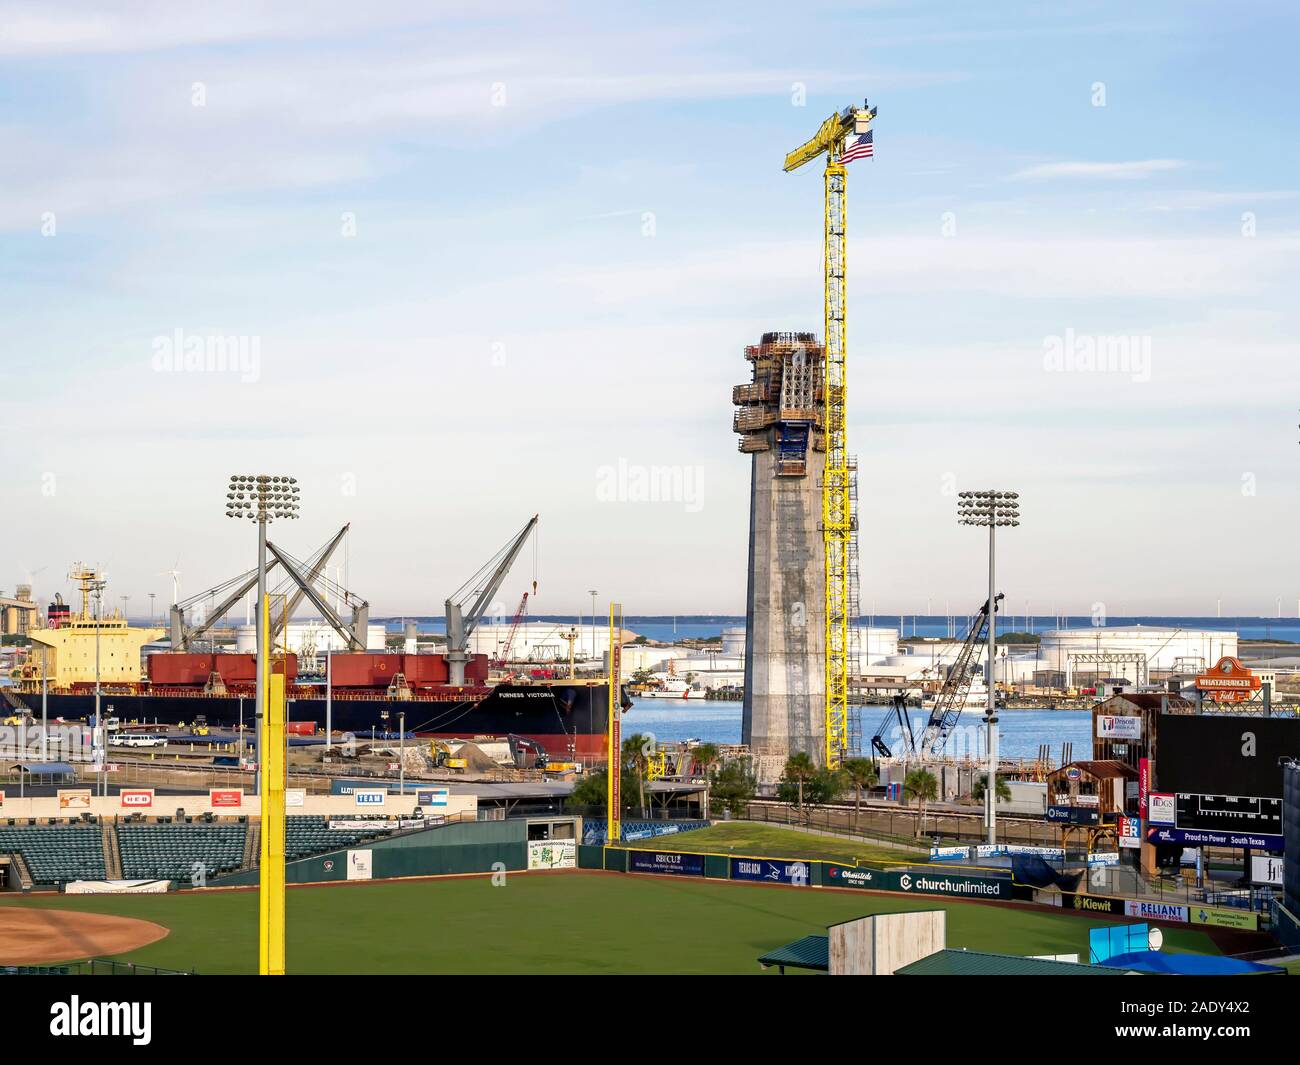 Elevated view of a concrete support column under construction for the New Harbor Bridge project in Corpus Christi, Texas USA. Port Of Corpus Christi. Stock Photo